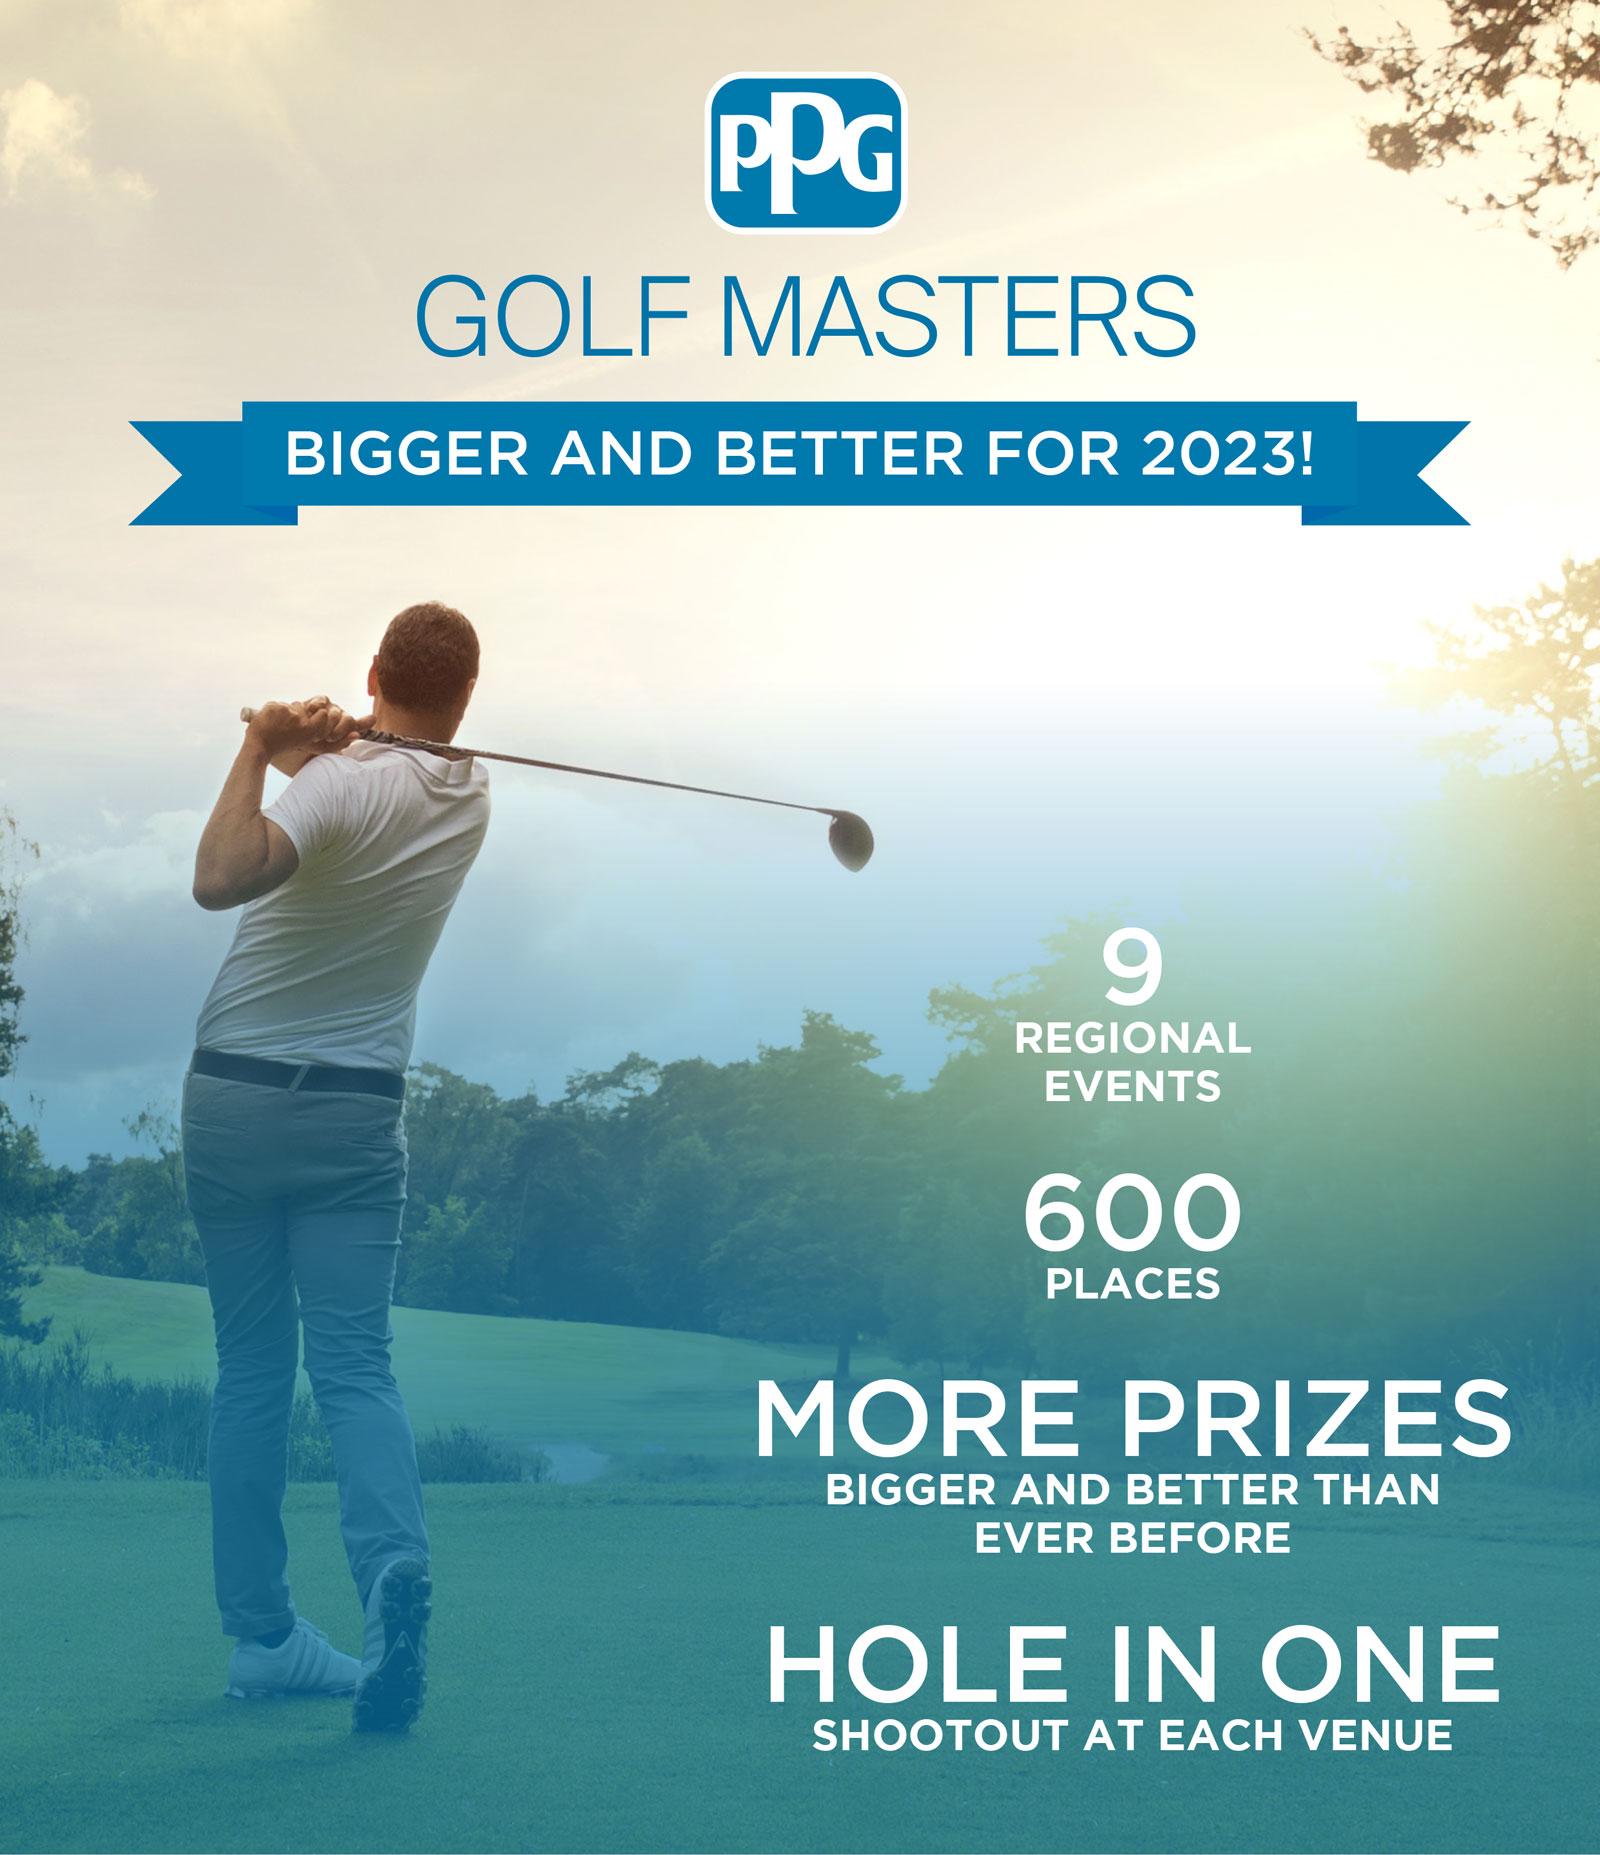 PPG Golf Masters poster